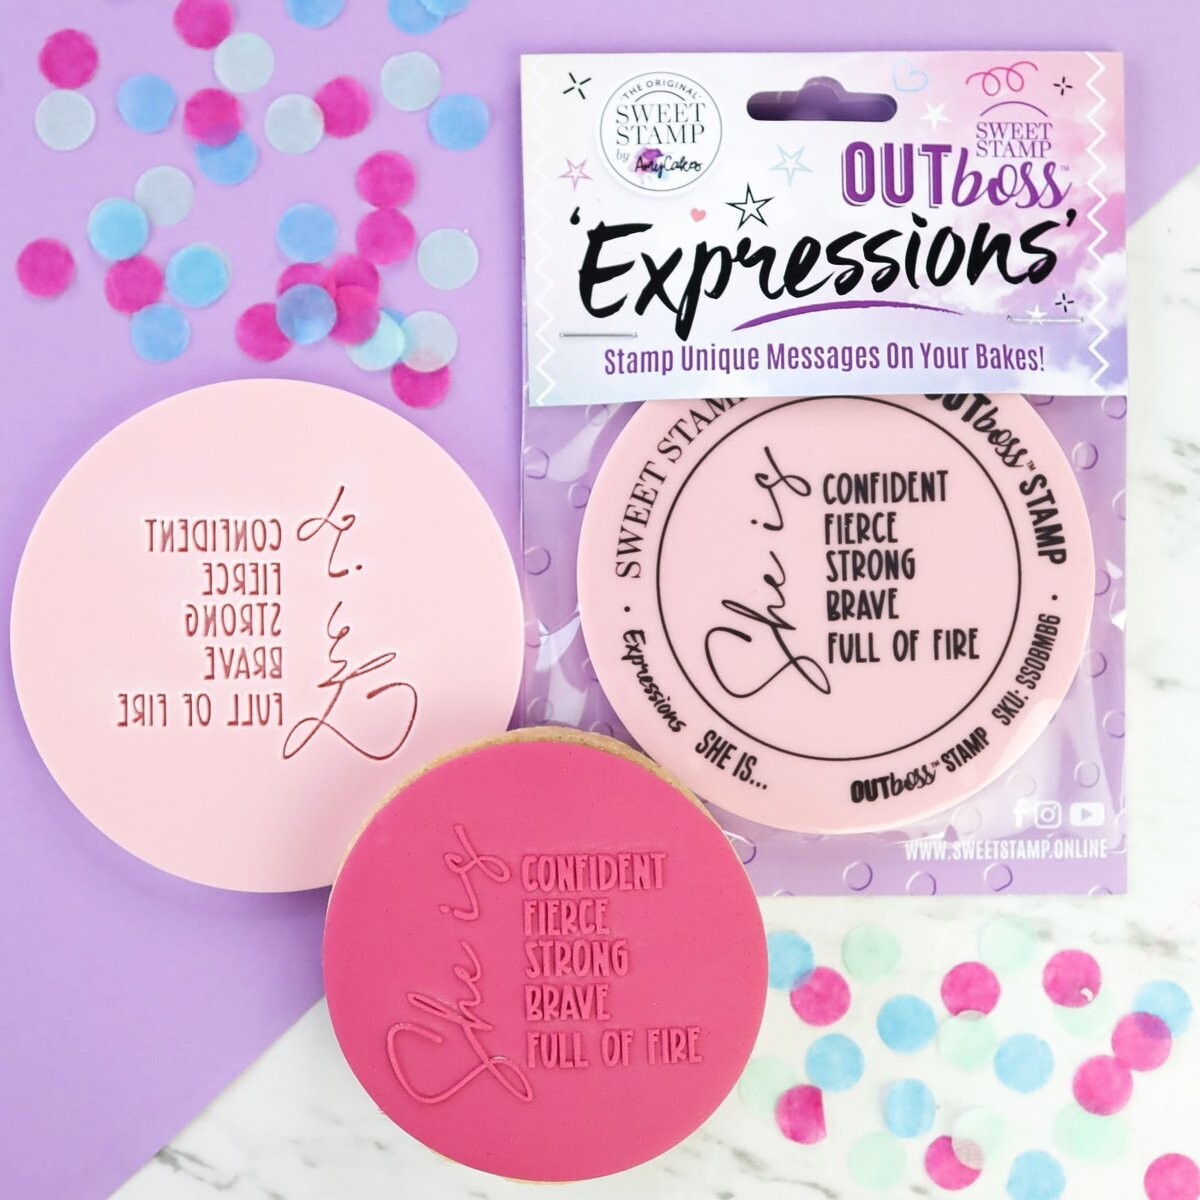 Sweet Stamp -OUTboss Expressions -SHE IS... -Σφραγίδα